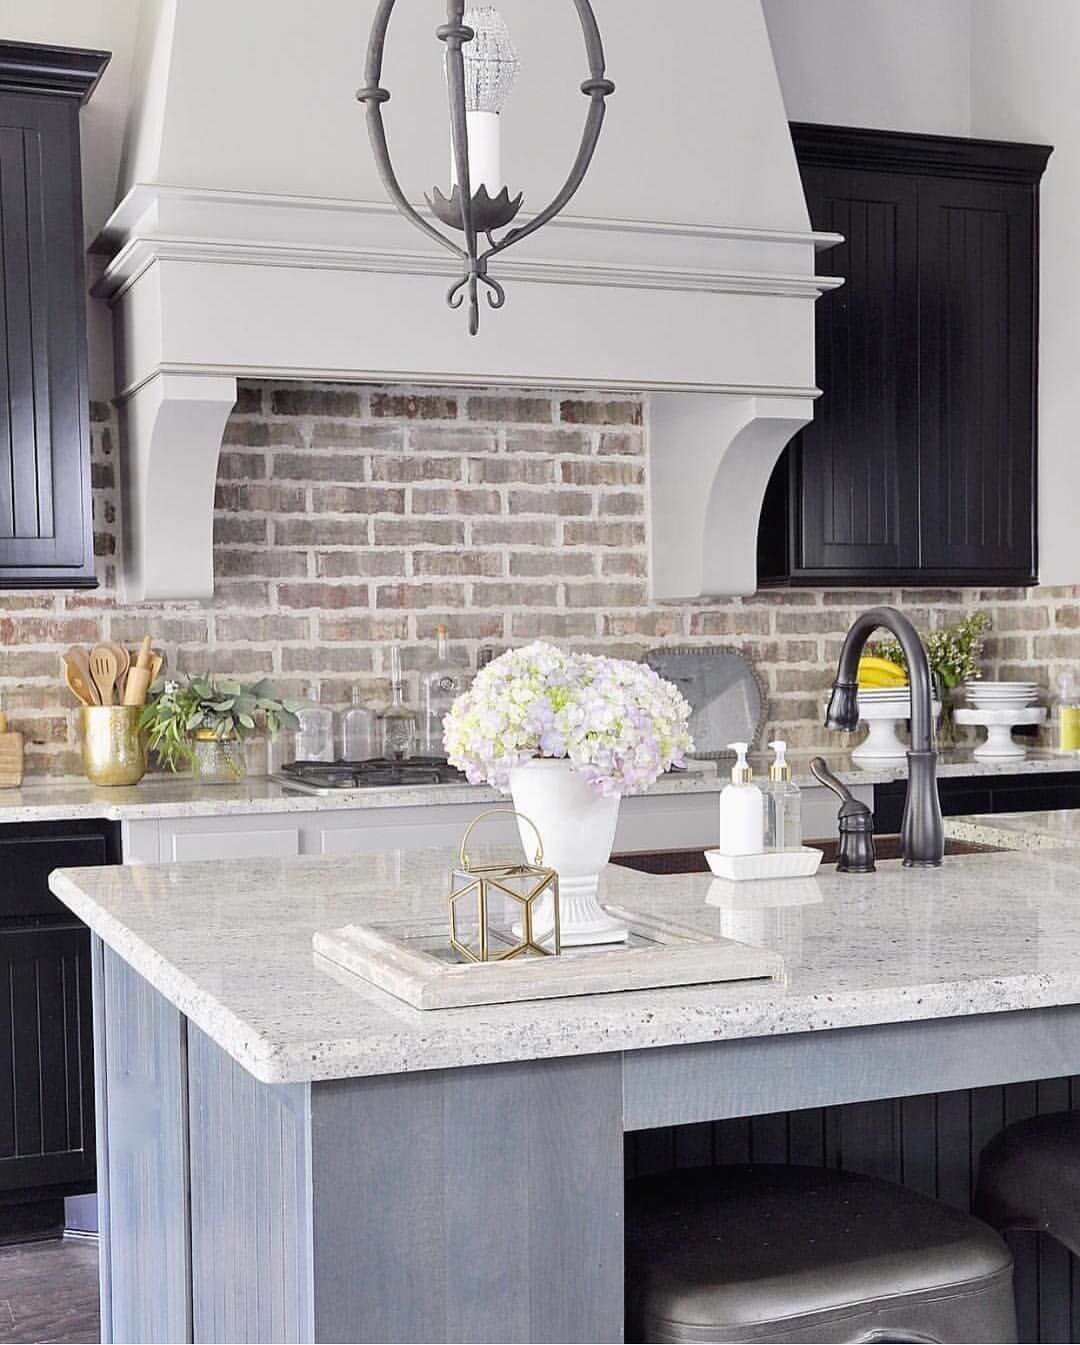 Graceful country kitchen lighting